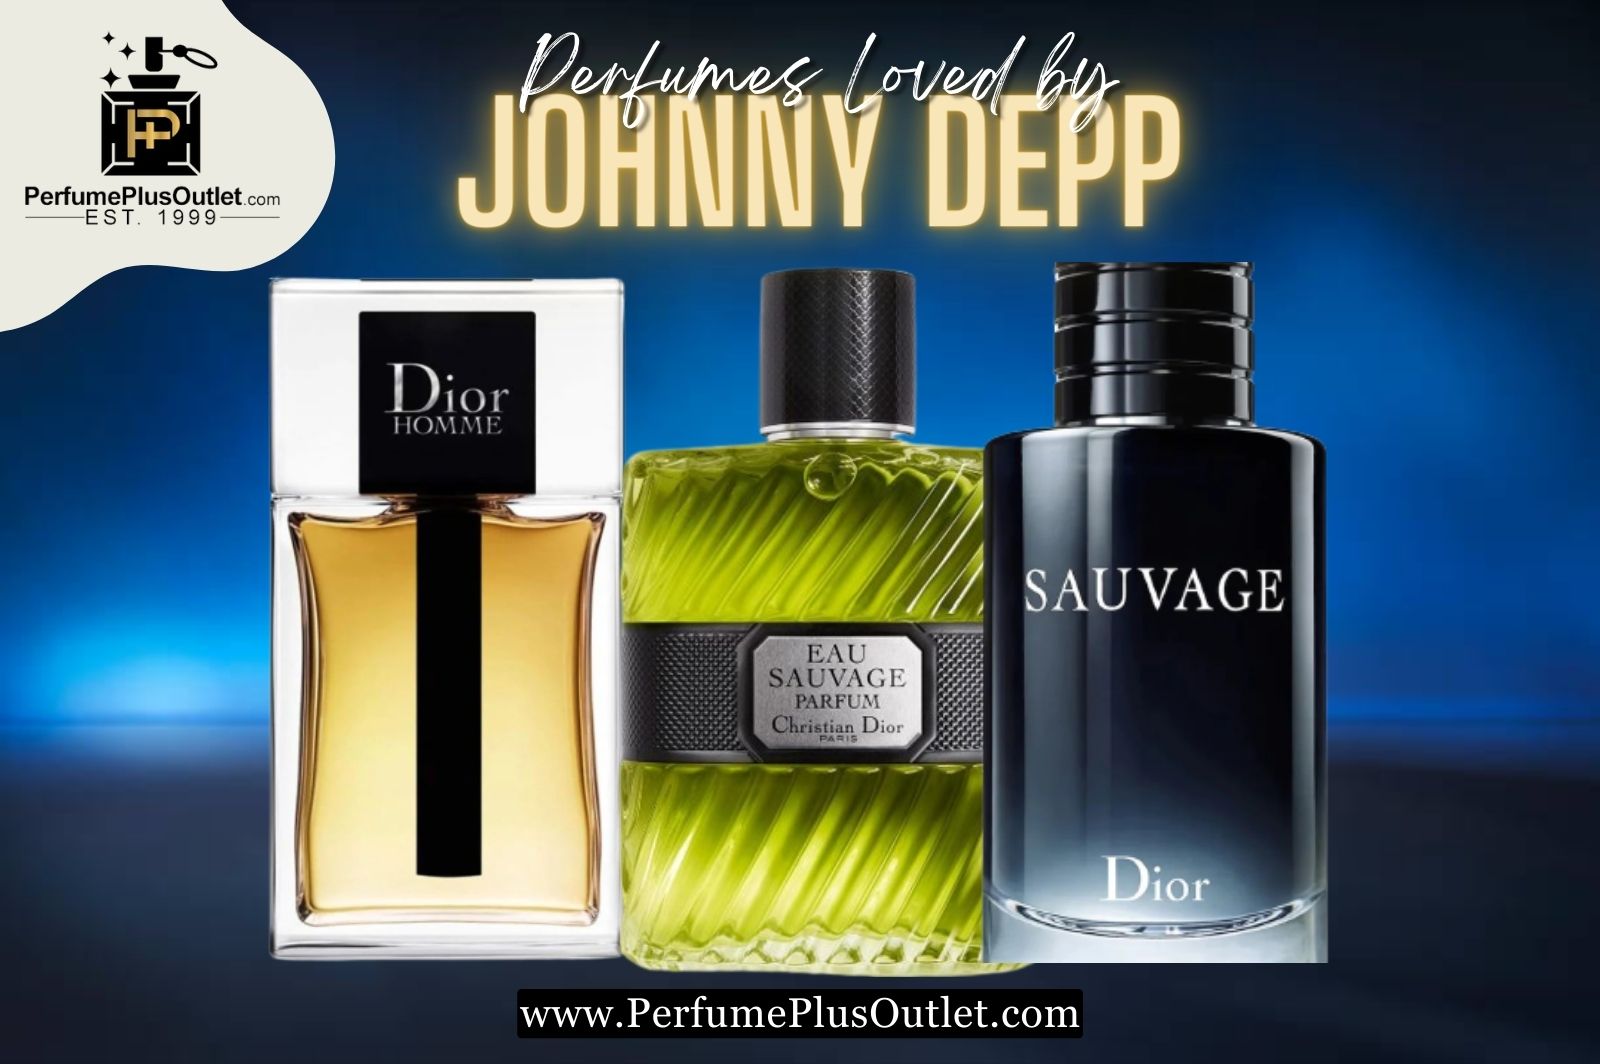 Perfumes Loved by Johnny Depp